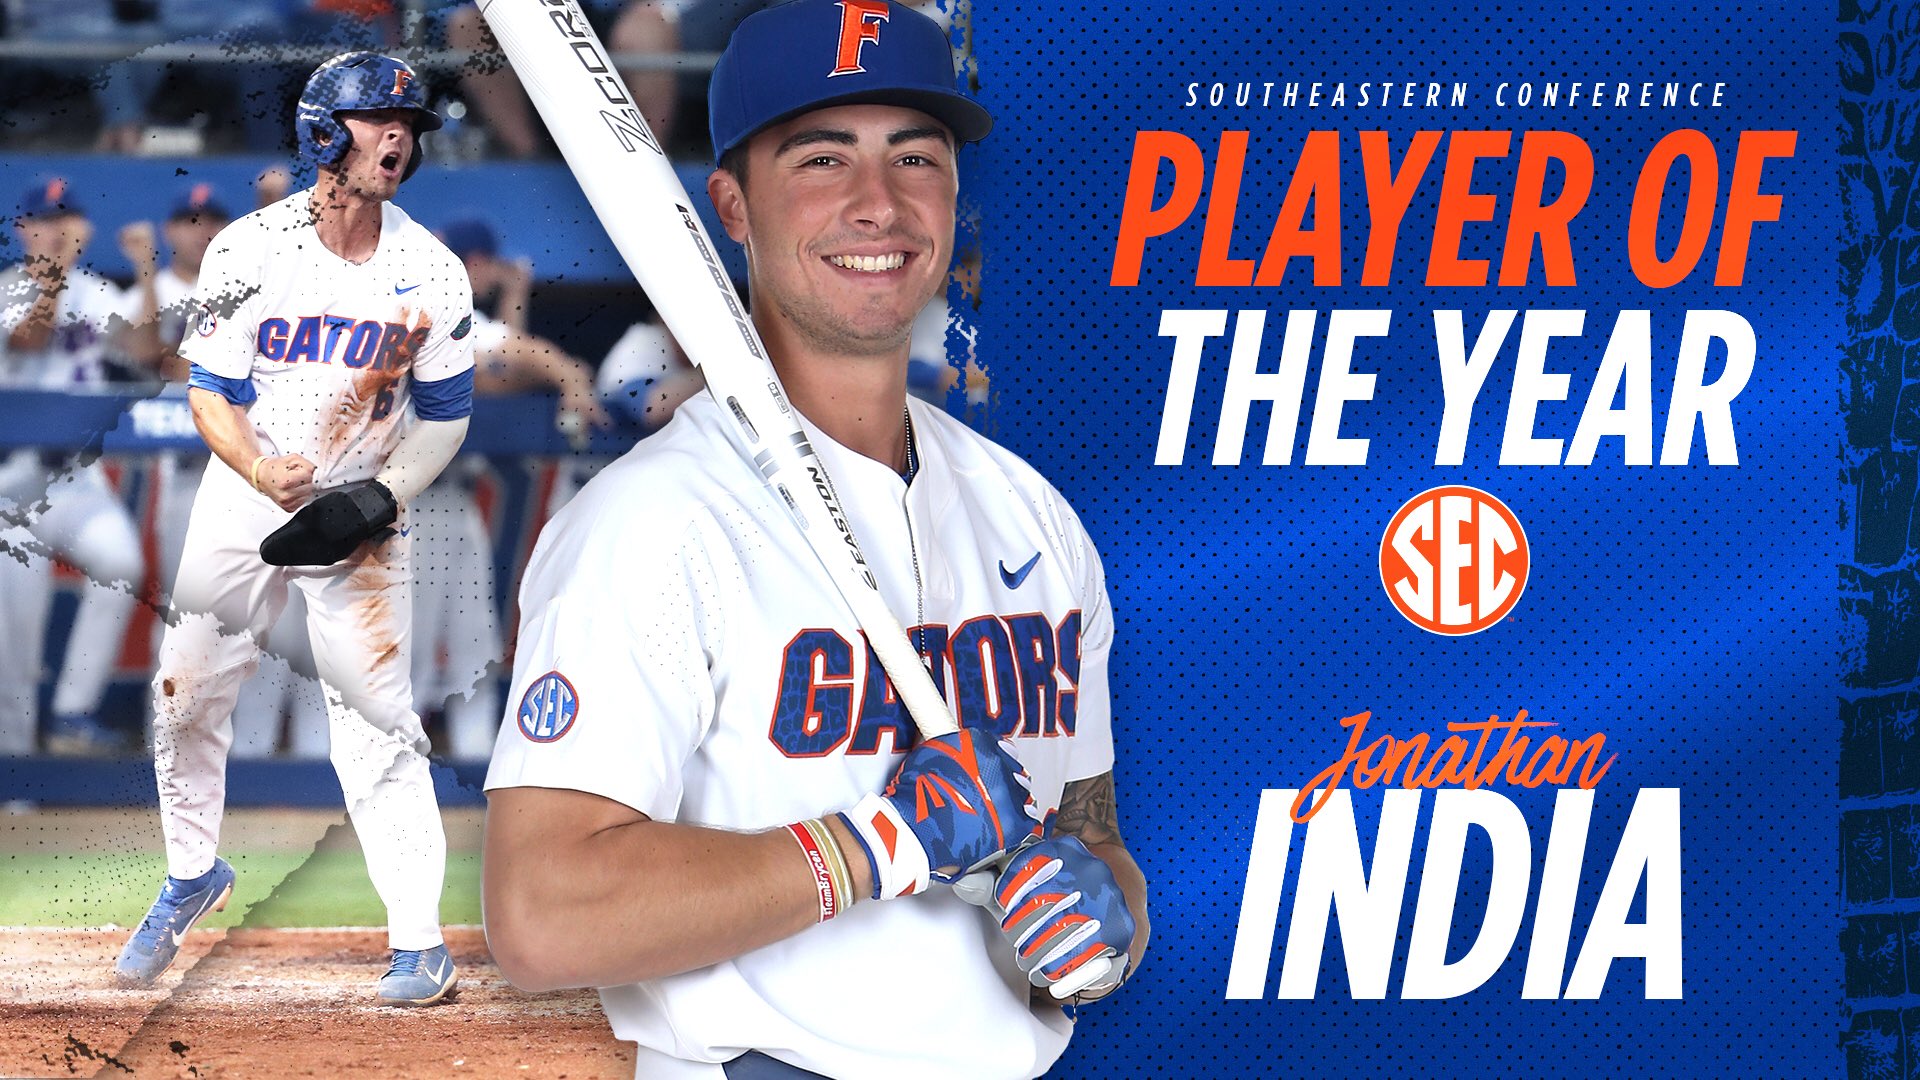 Florida Gators Baseball on X: For the fourth time in program history, the  best player in the @SEC is from the #Gators! Jonathan India joins Mike  Zunino (2011) and Matt LaPorta (2005